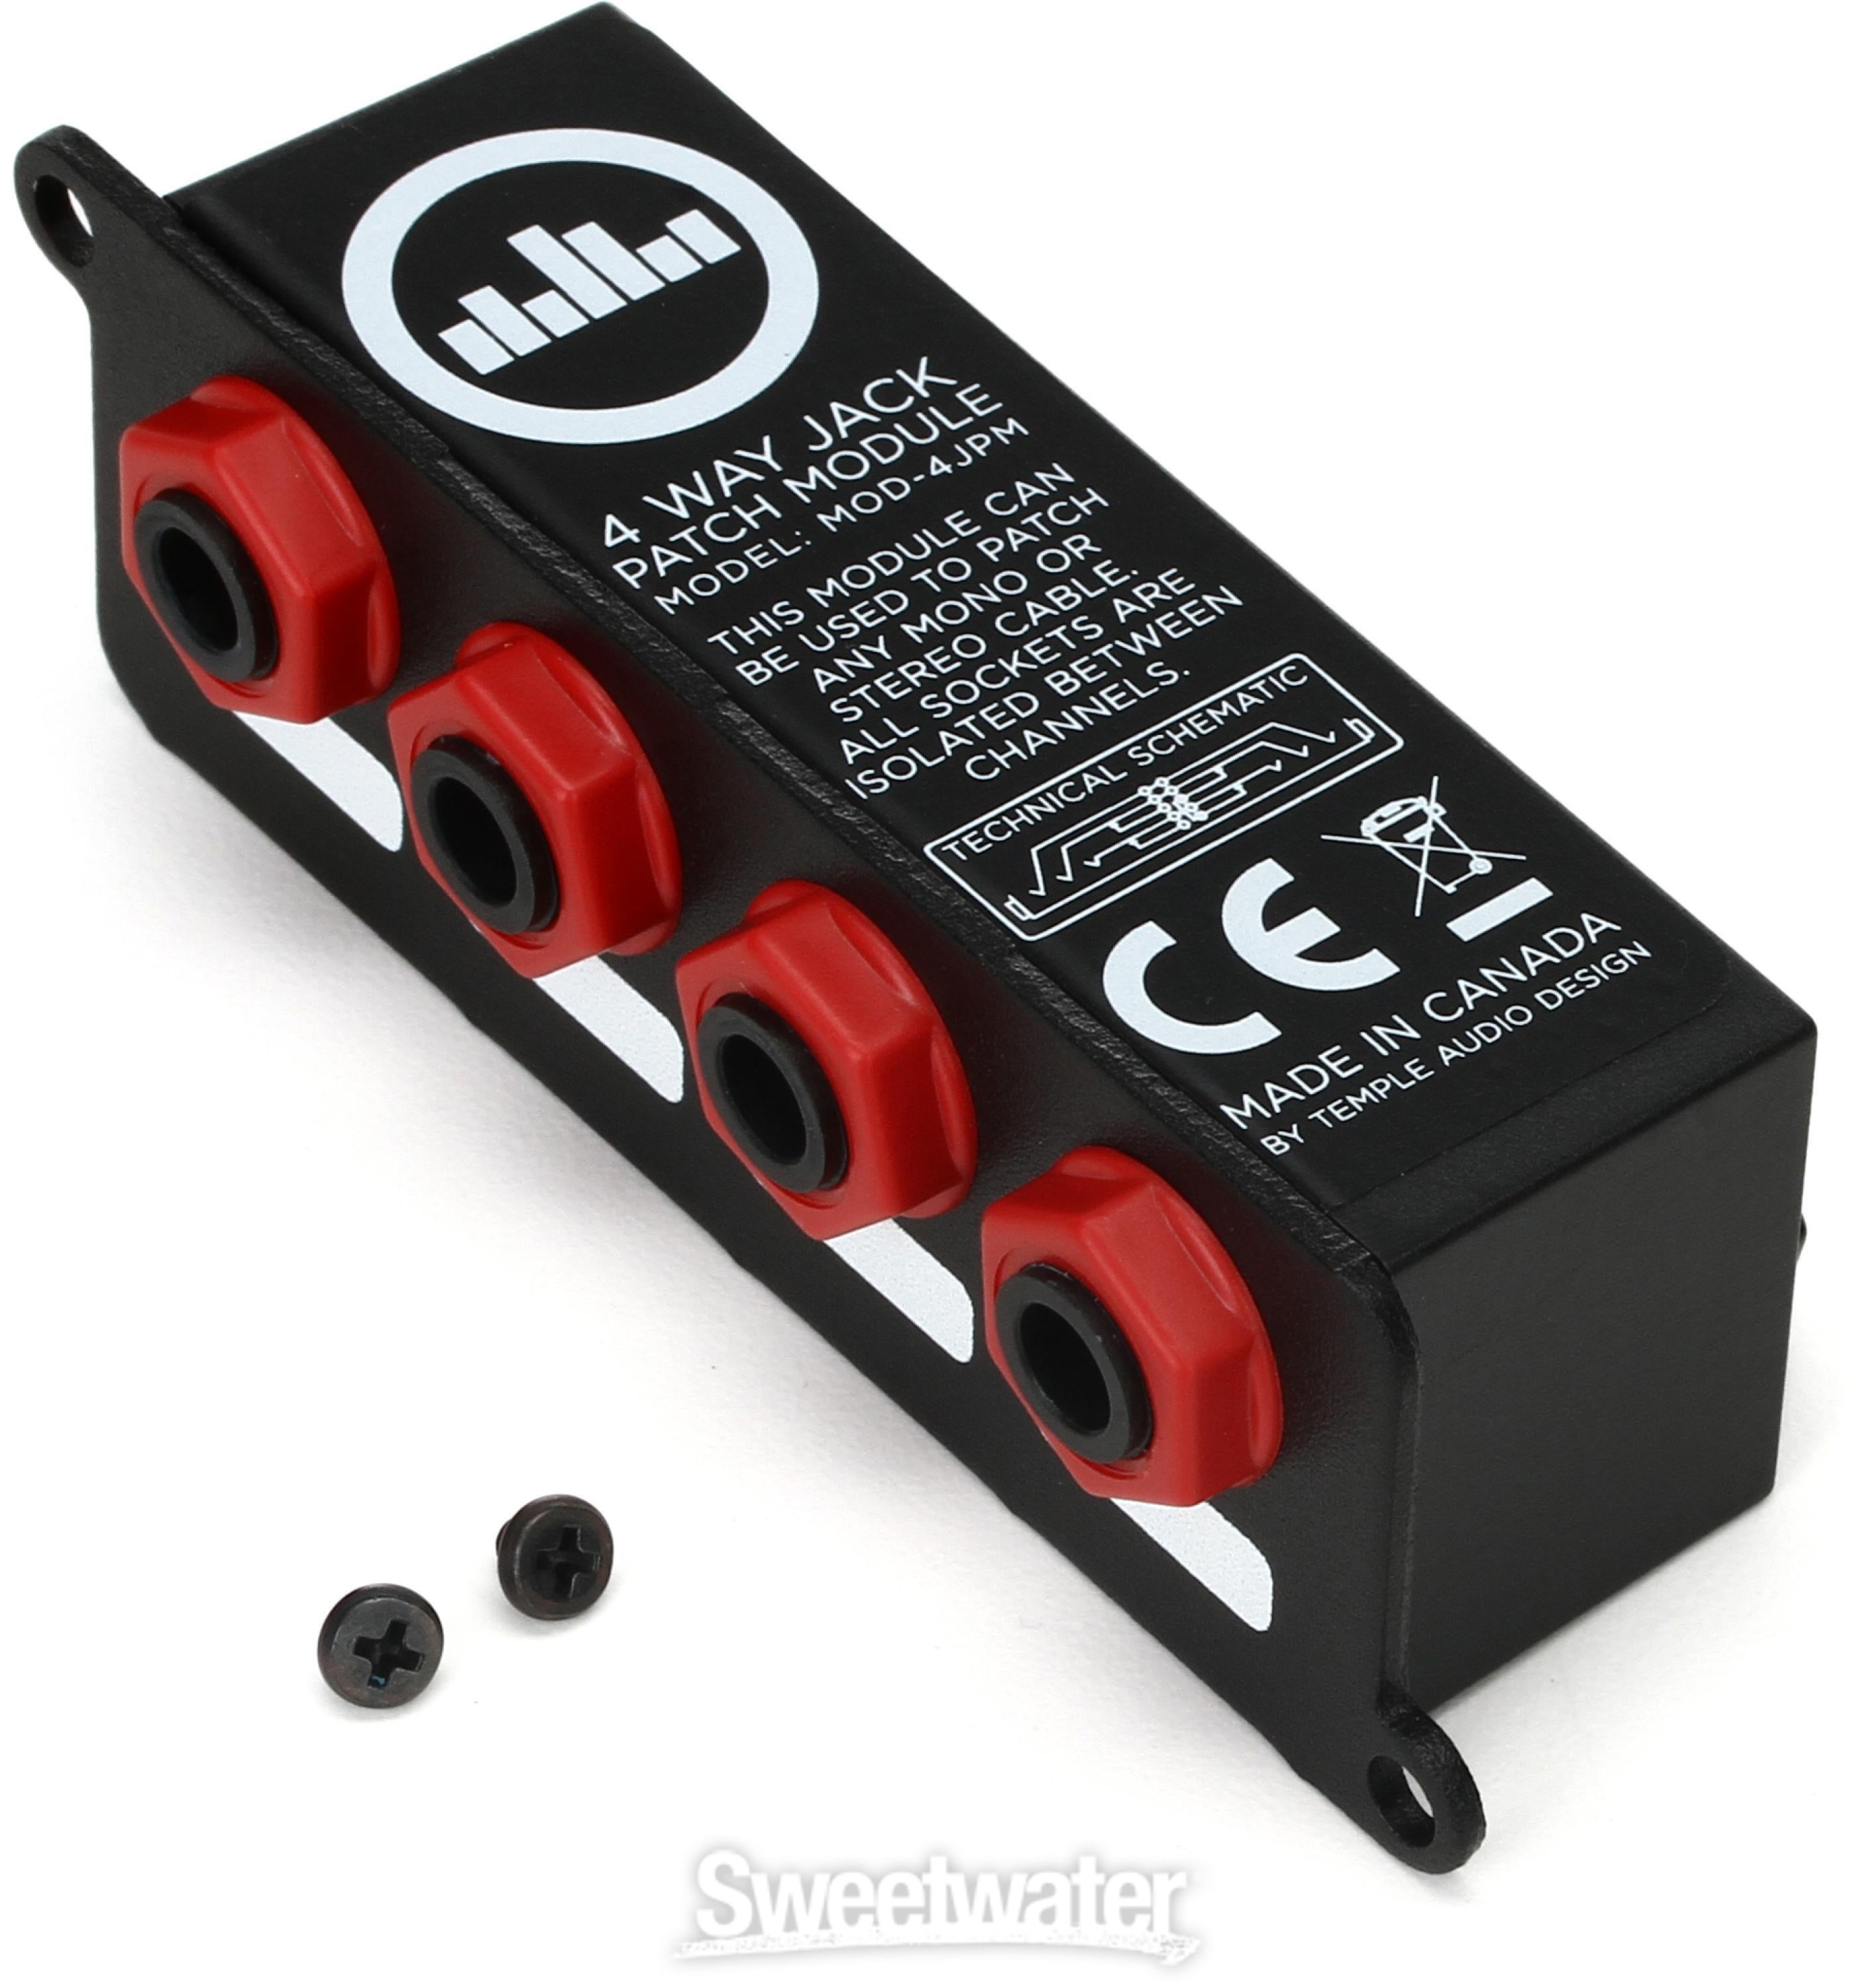 Temple Audio 4-Way Jack Patch Module Reviews | Sweetwater